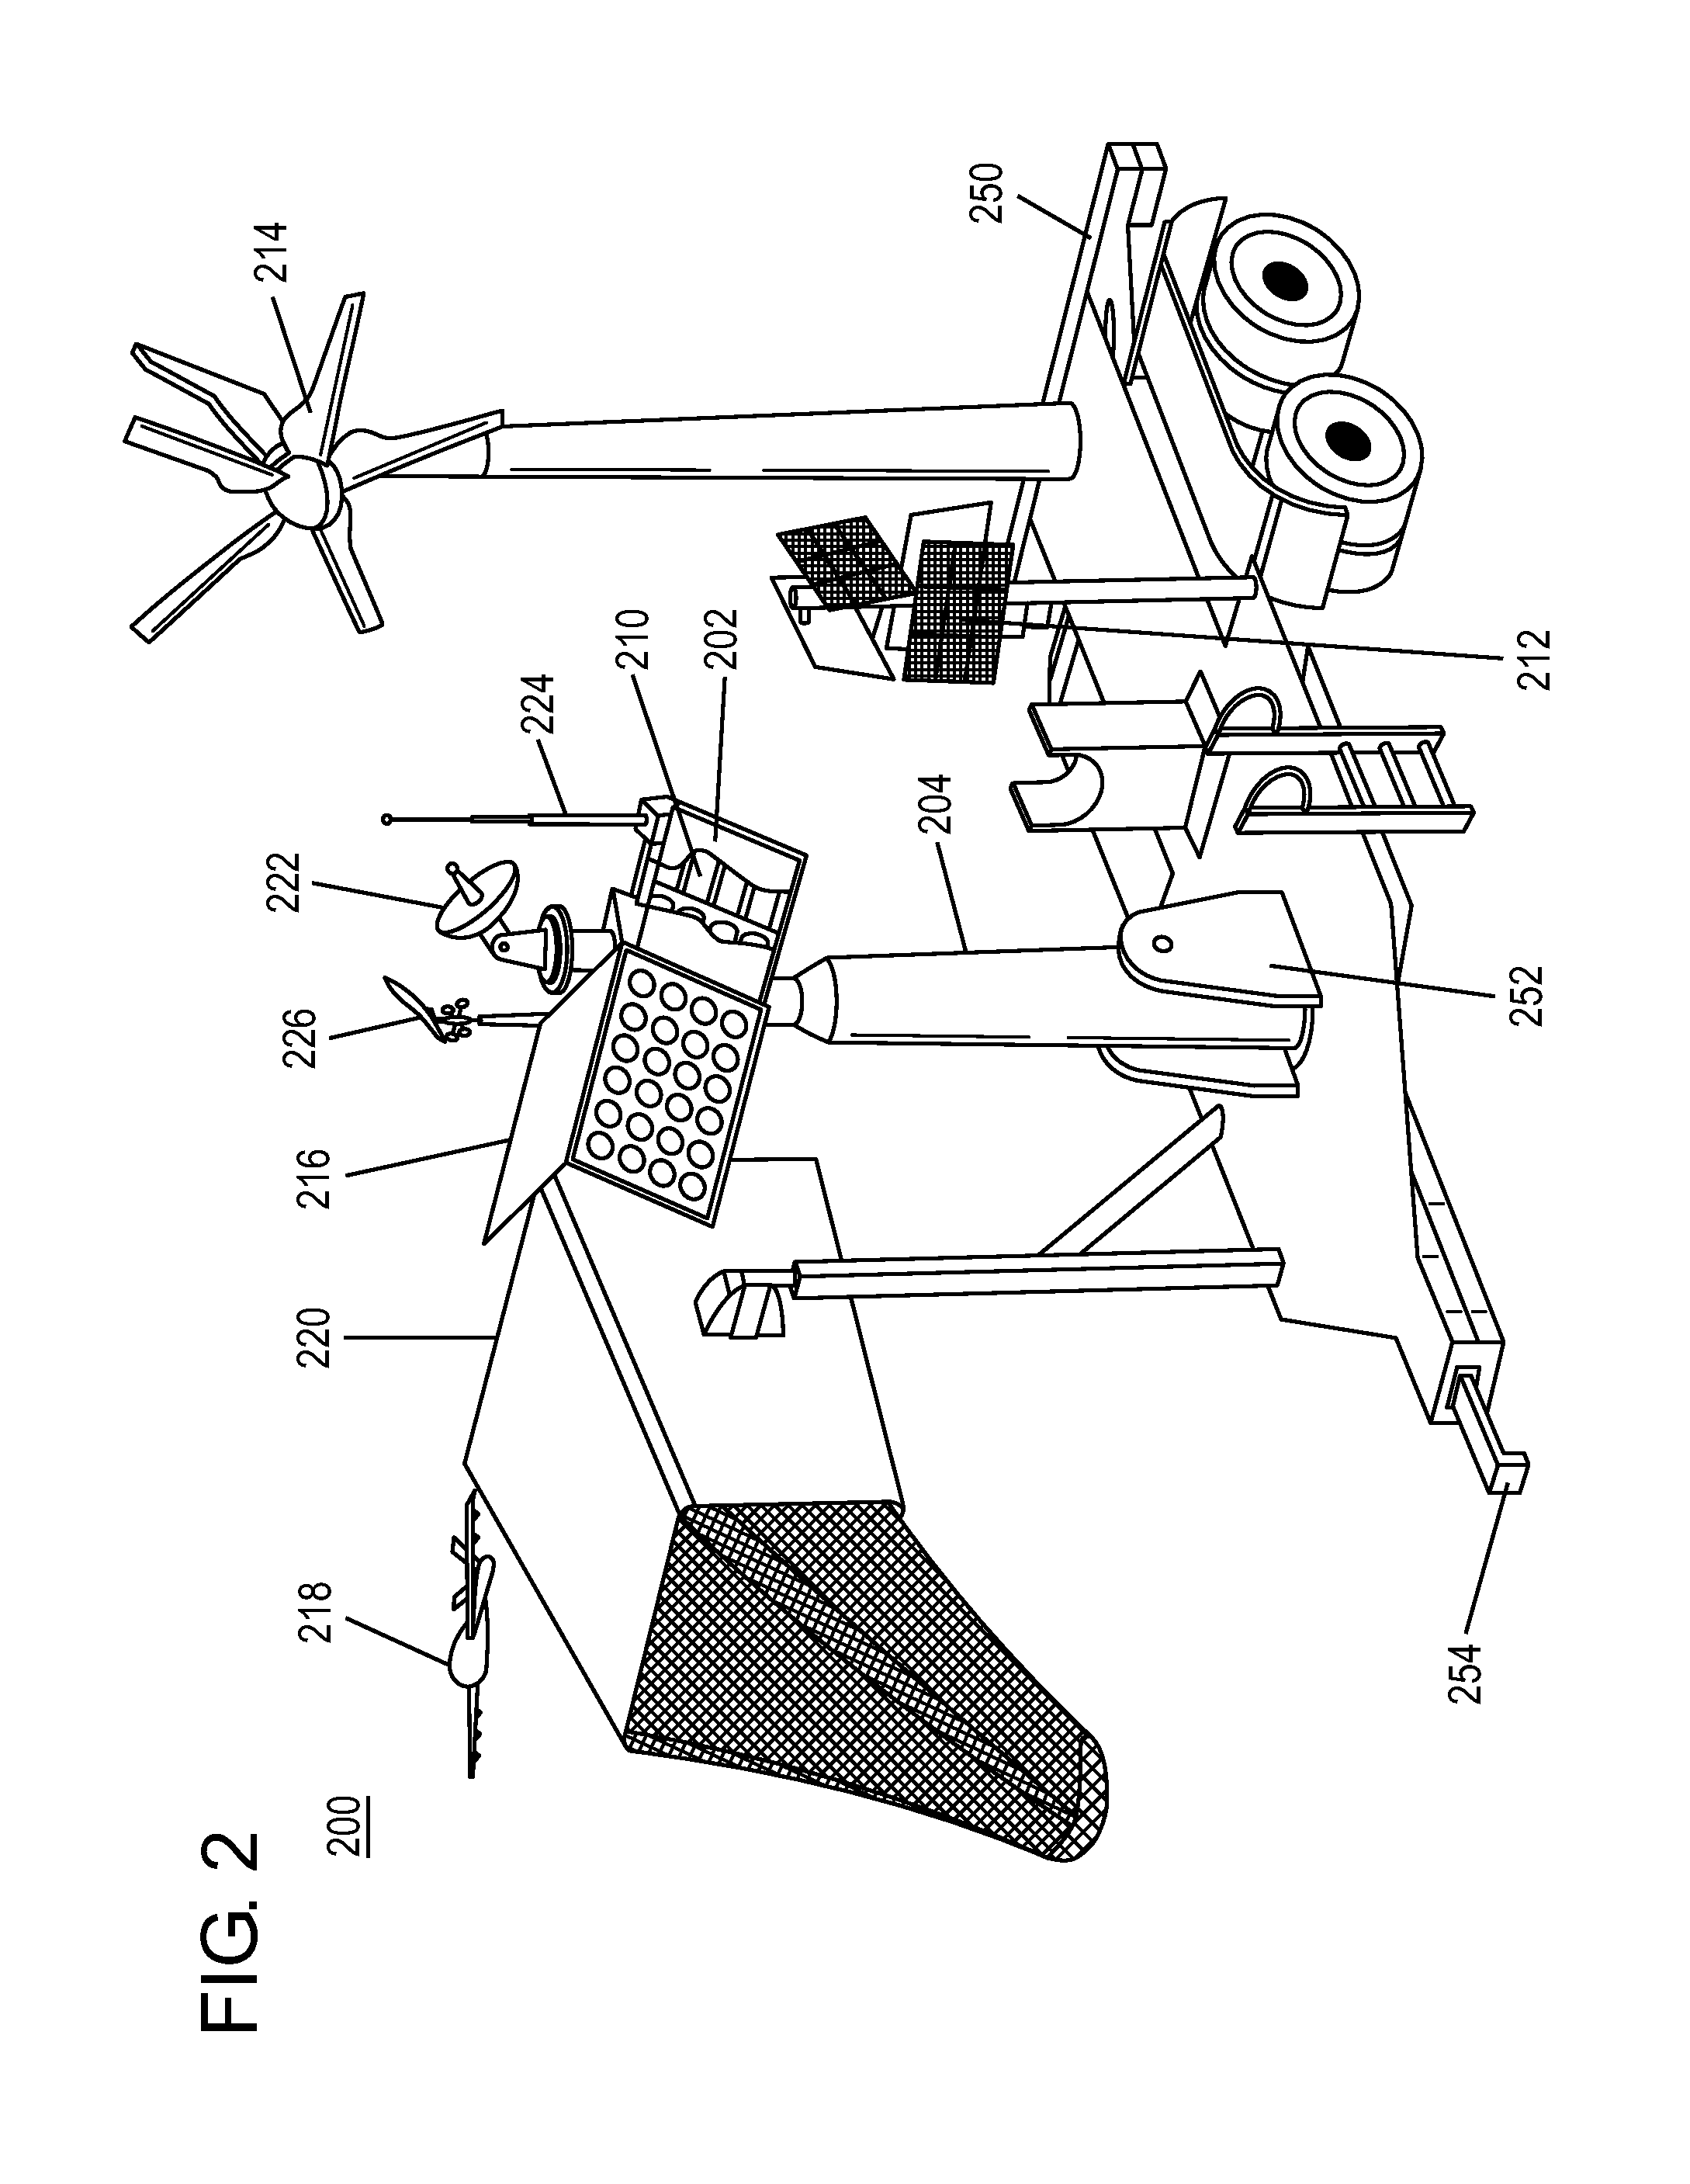 Systems and methods for deployment and operation of unmanned aerial vehicles